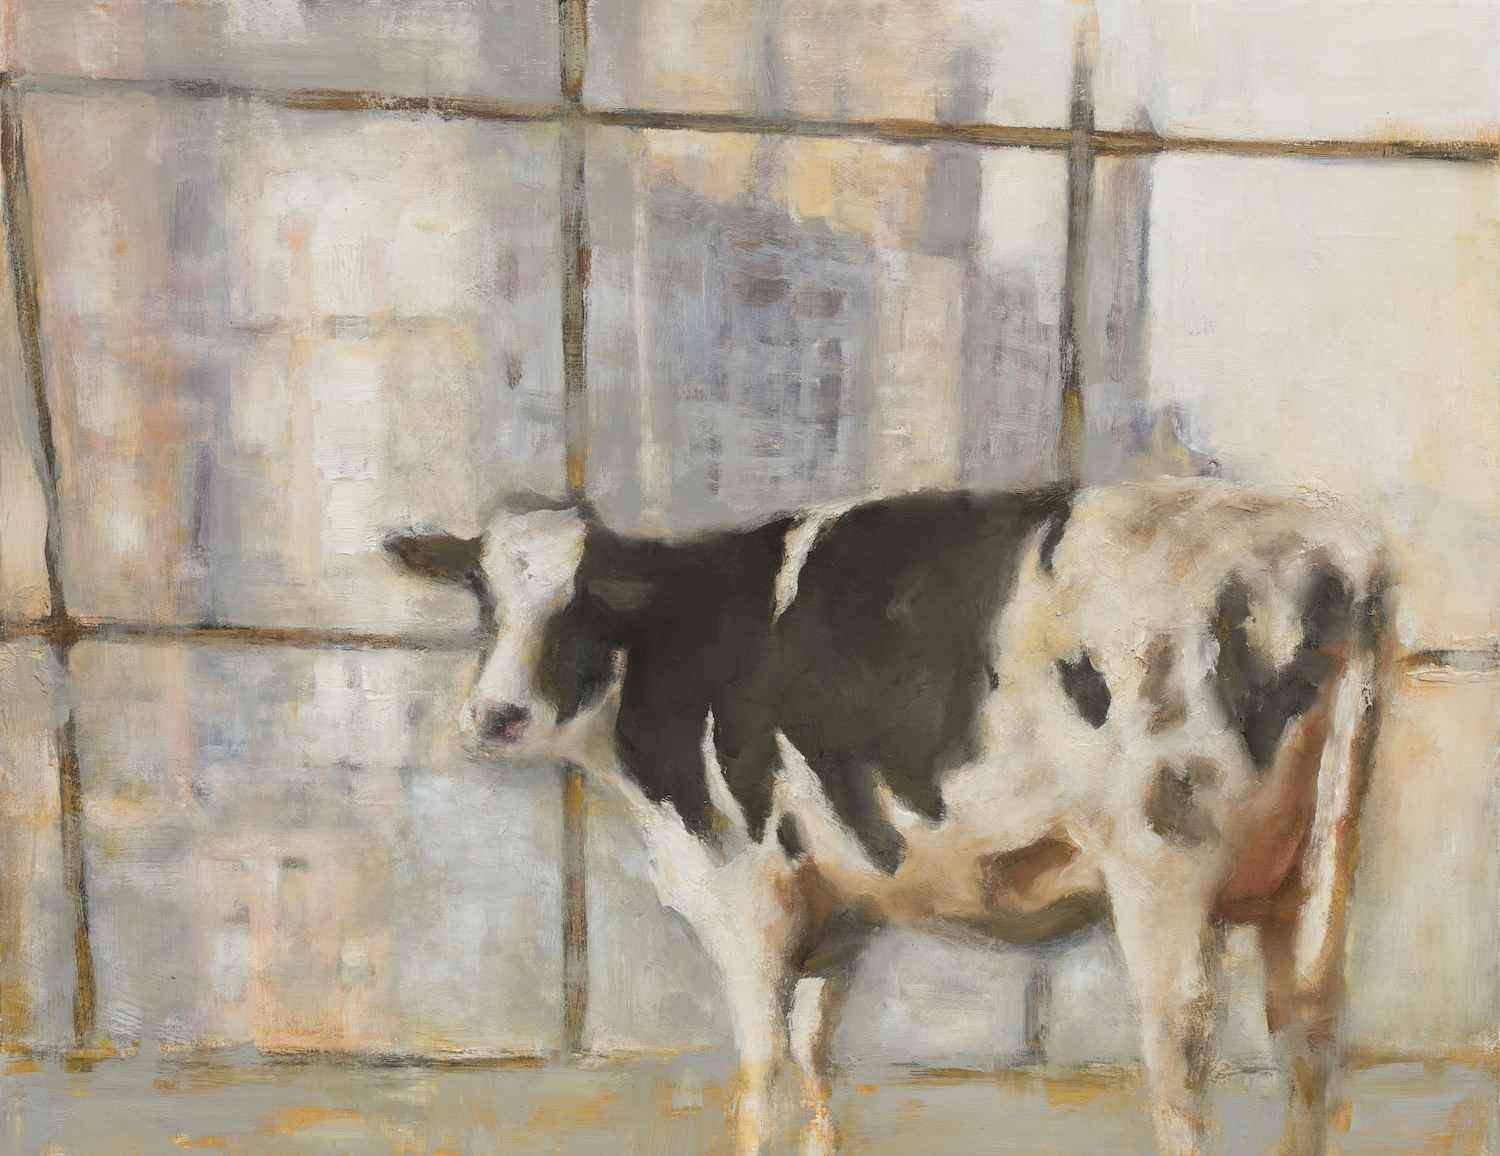 Painting of a cow looking out a window.  Humorous.  Original Oil Painting by Elsa Sroka.  17" x 22"